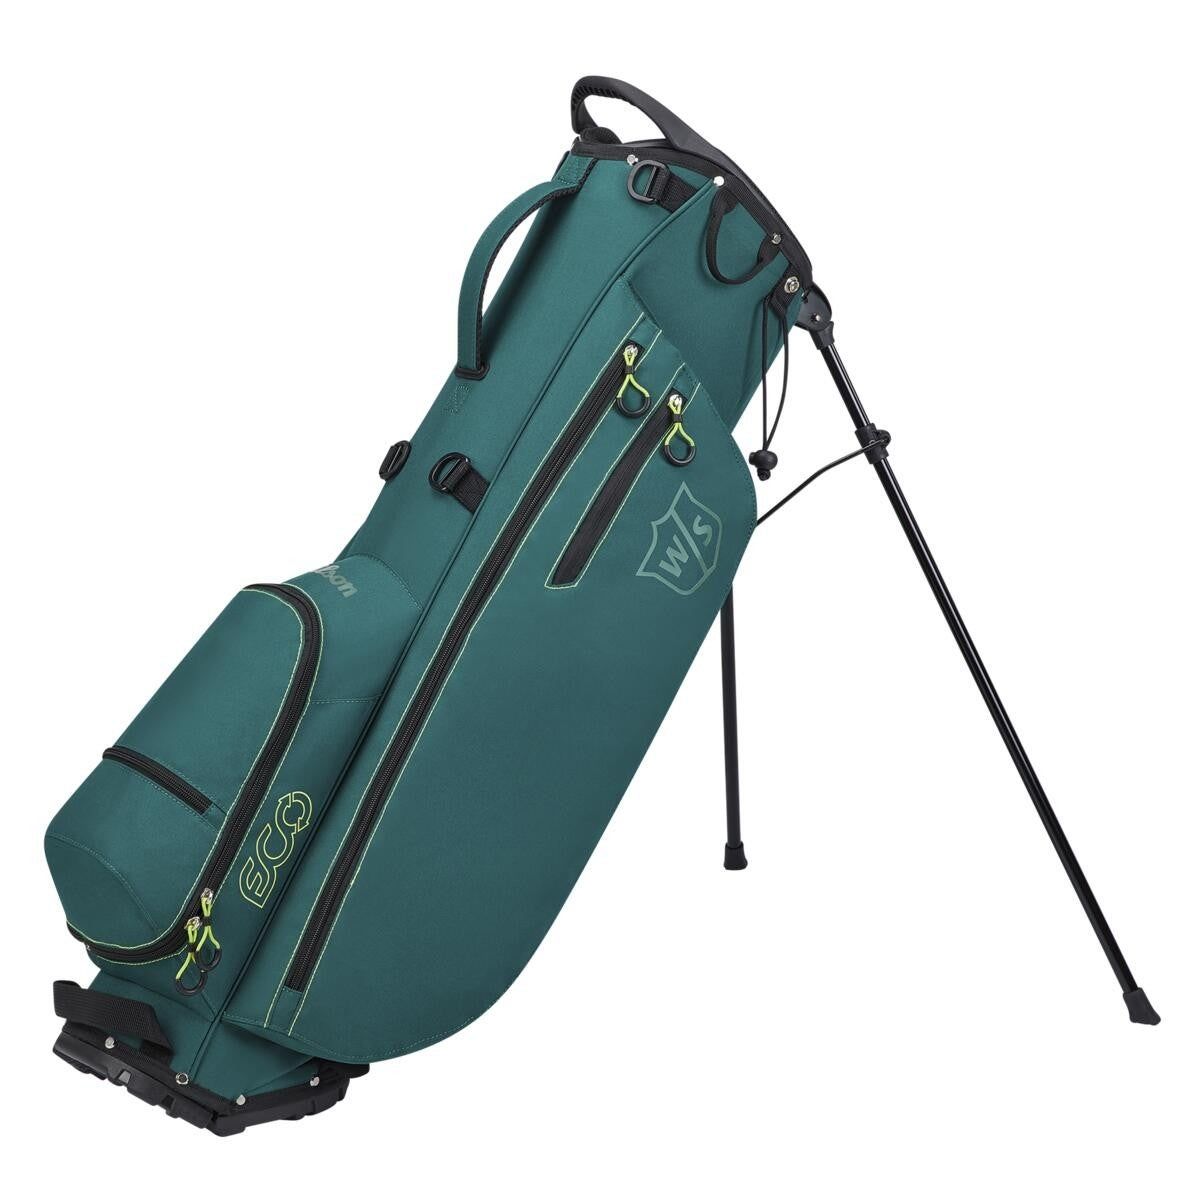 Wilson Staff ECO Stand Bag review an unassuming golf bag with a cool